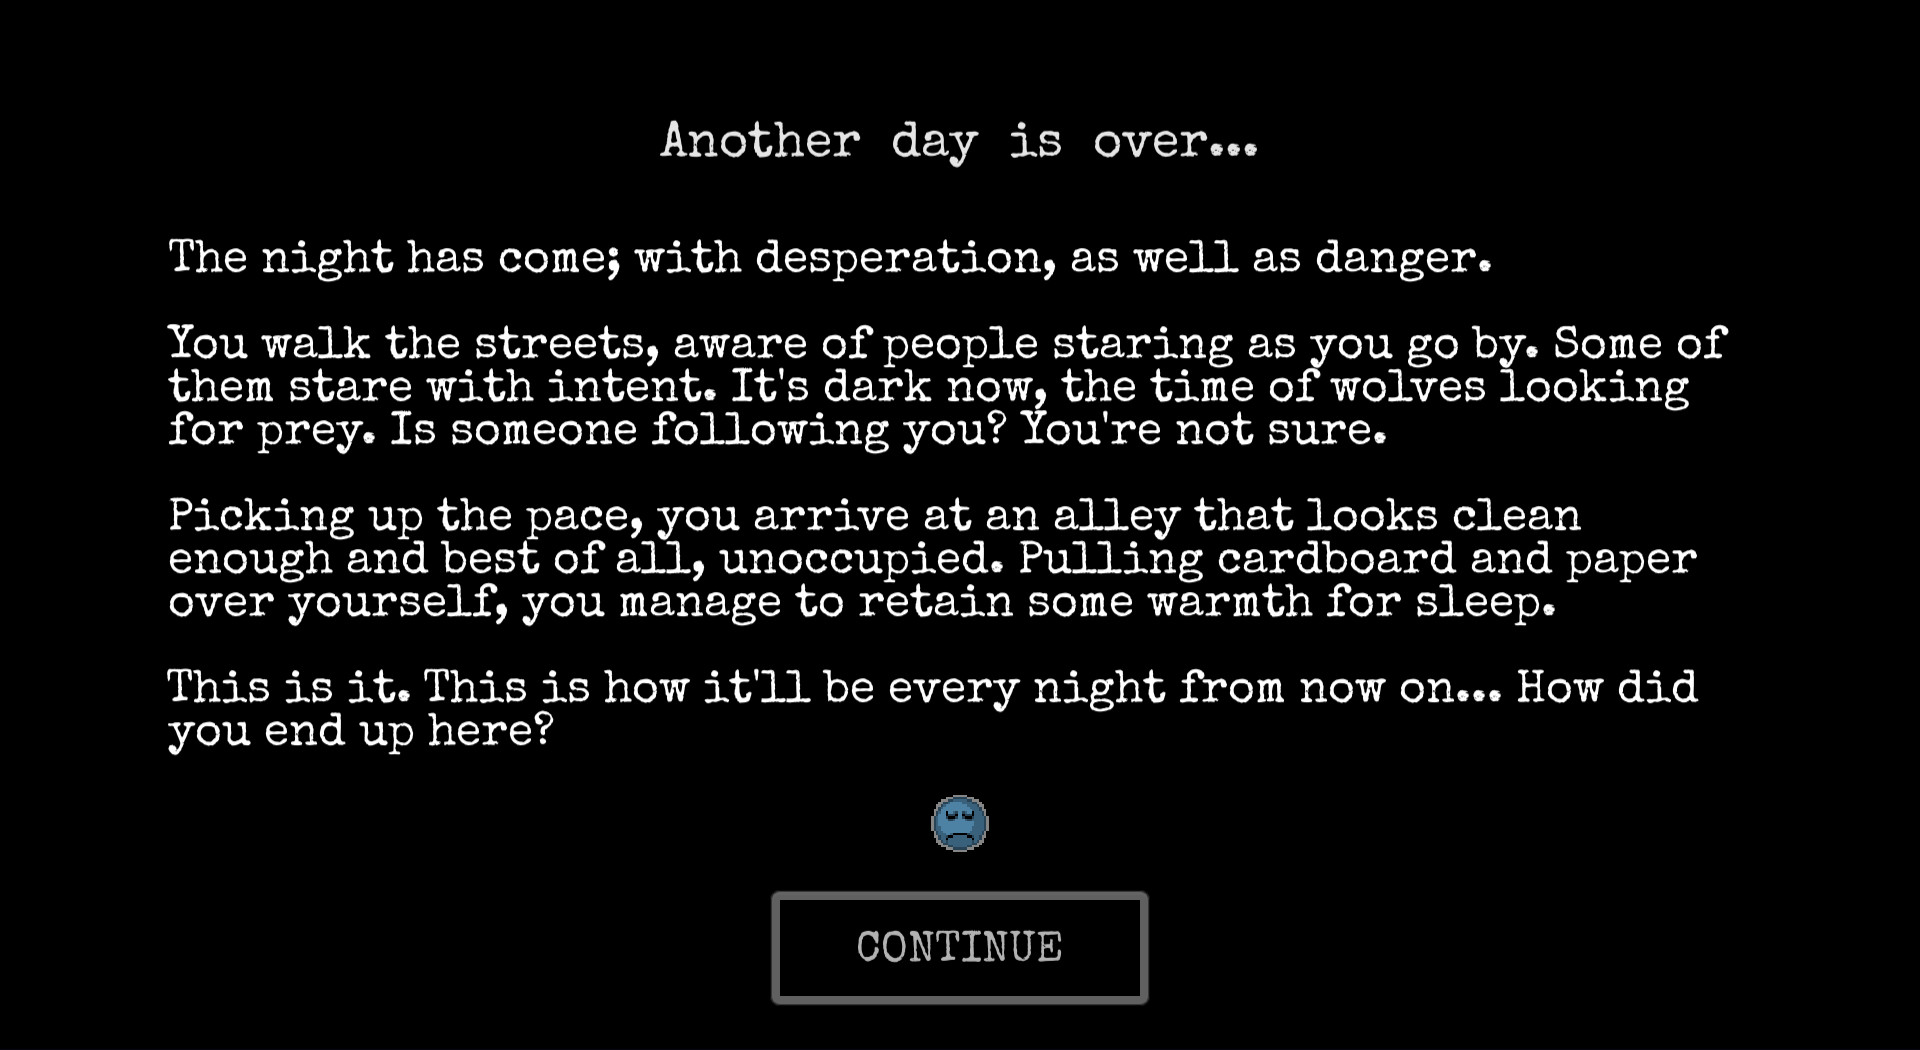 Steam Change A Homeless Survival Experience